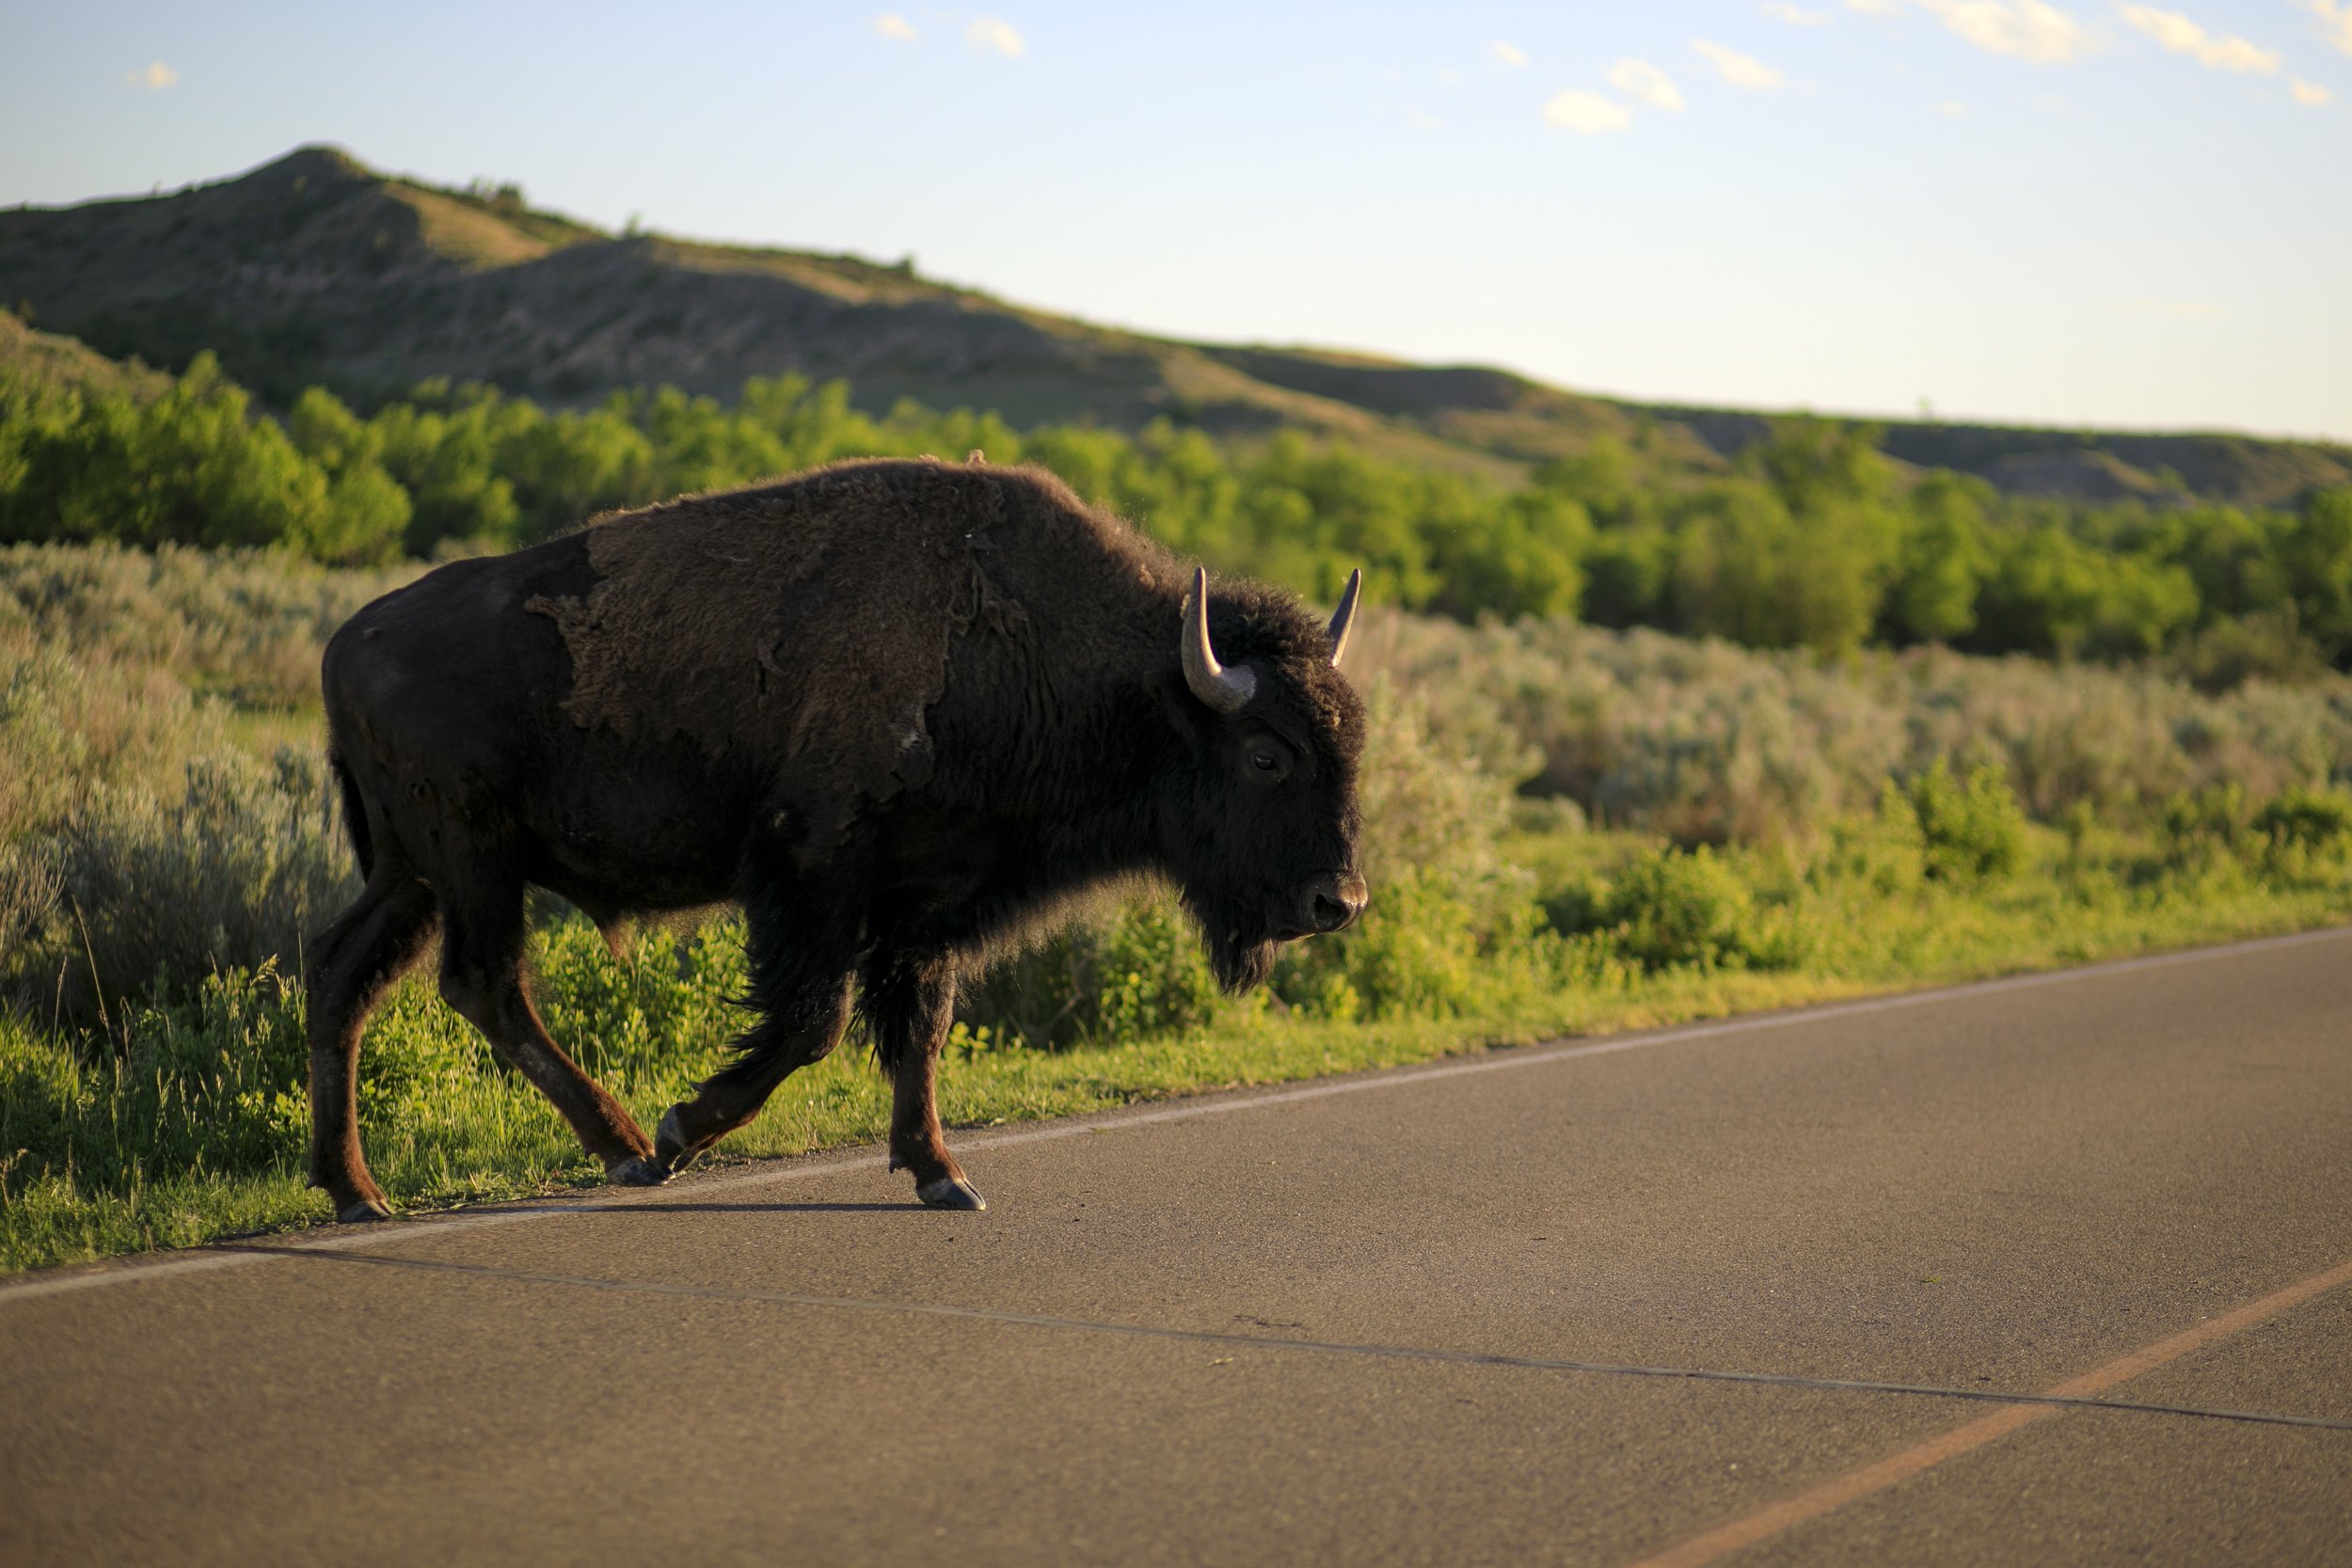  A bison crosses the road, causing cars to stop and wait on June 12, 2021 in Theodore Roosevelt National Park, North Dakota. 